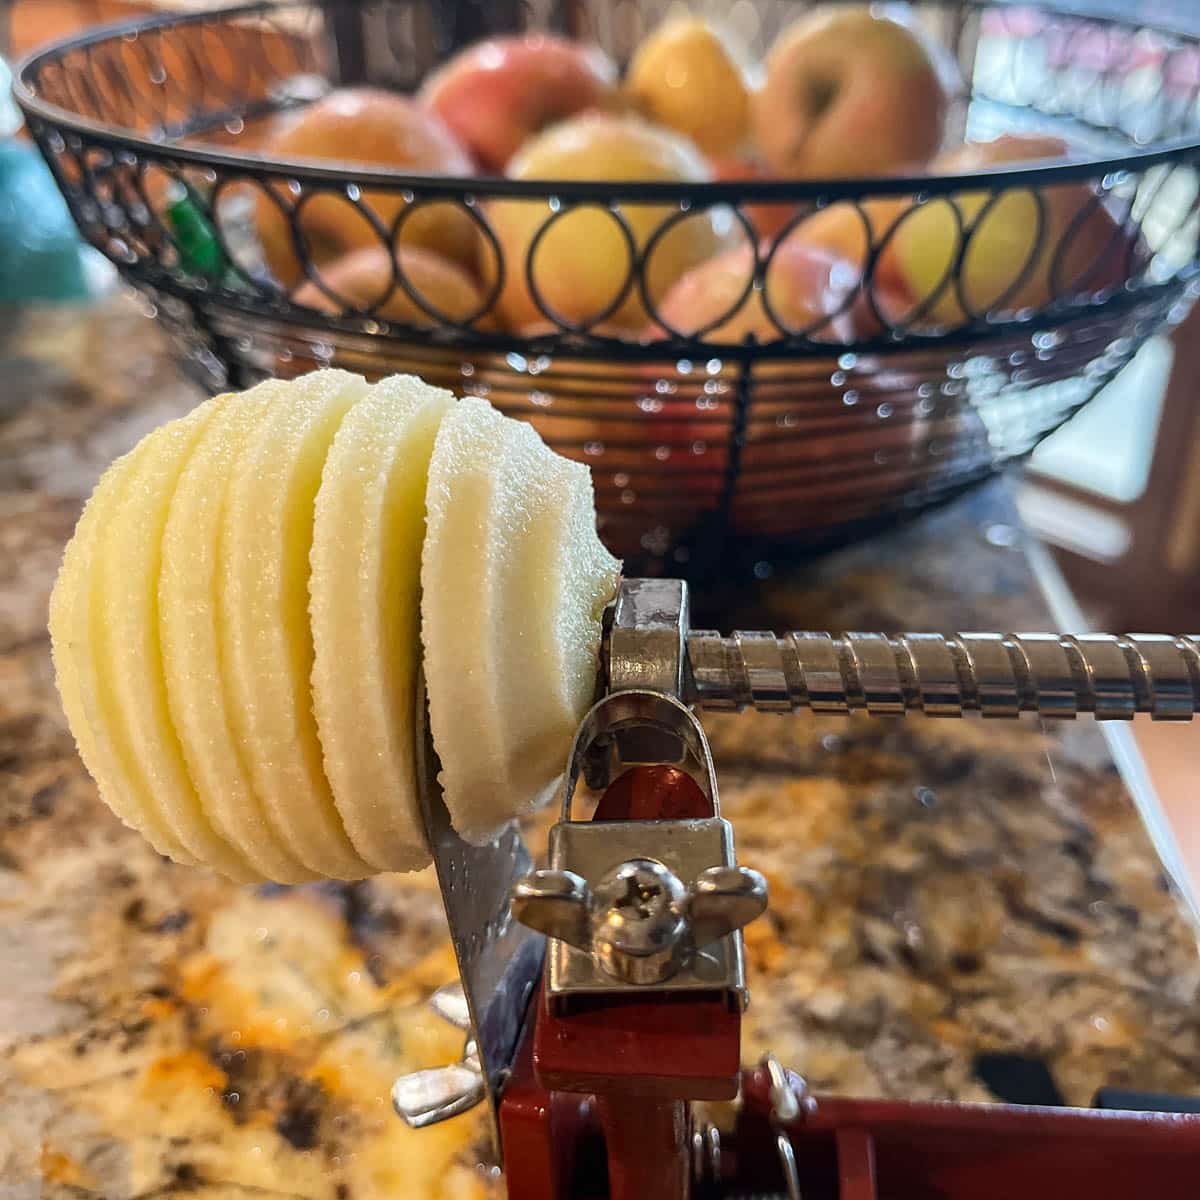 peeling and slicing apples